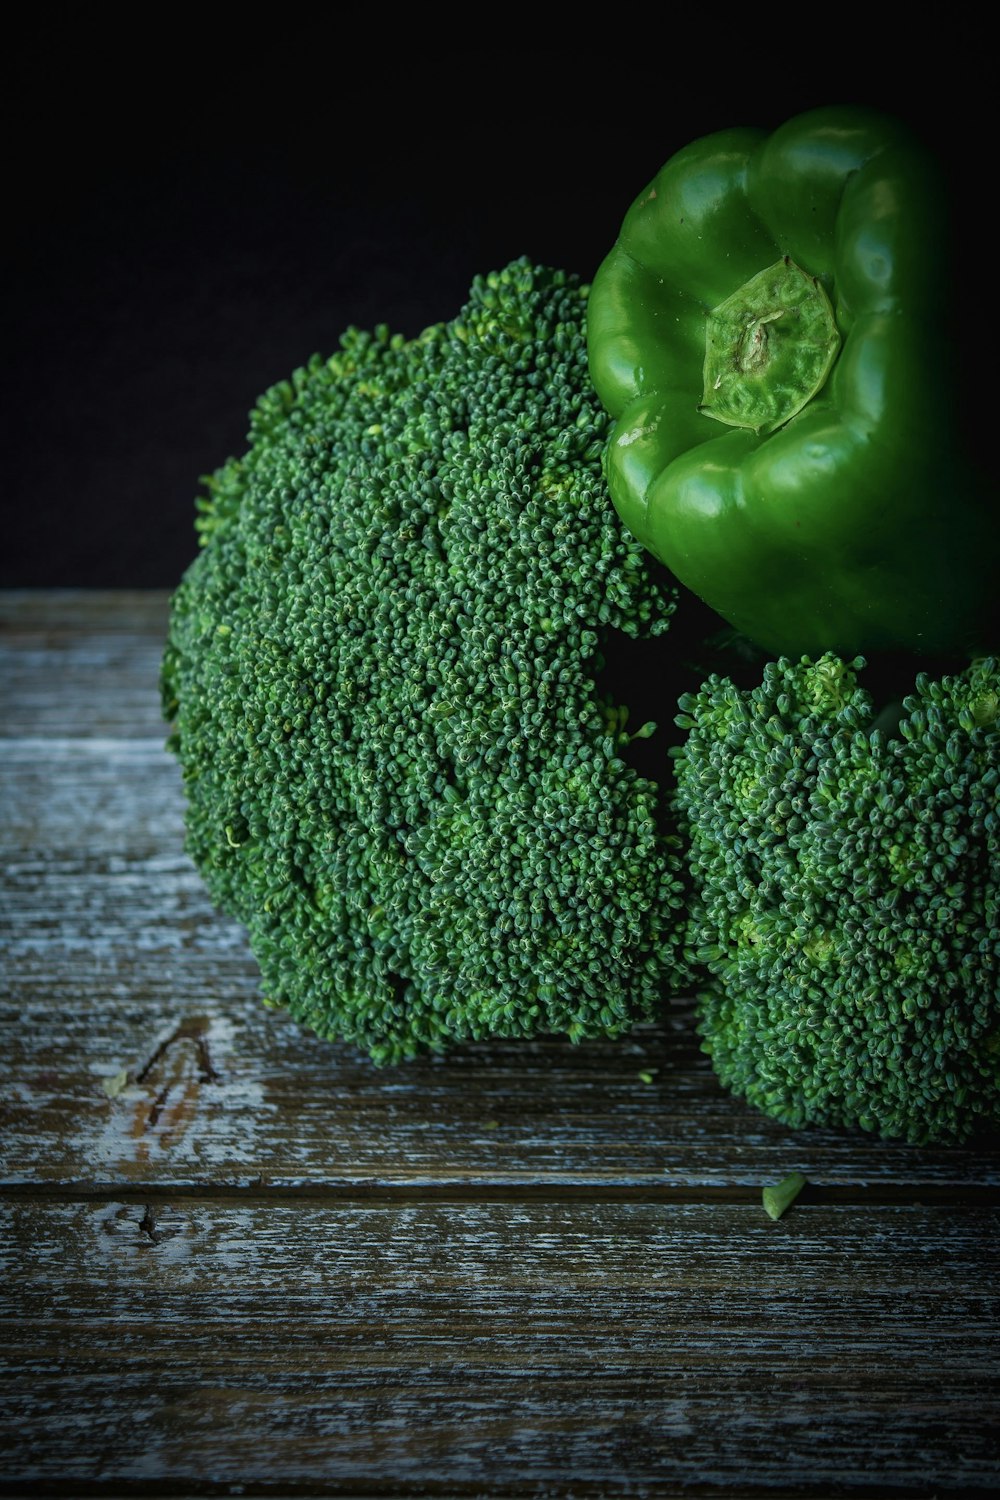 green bell pepper and green broccoli